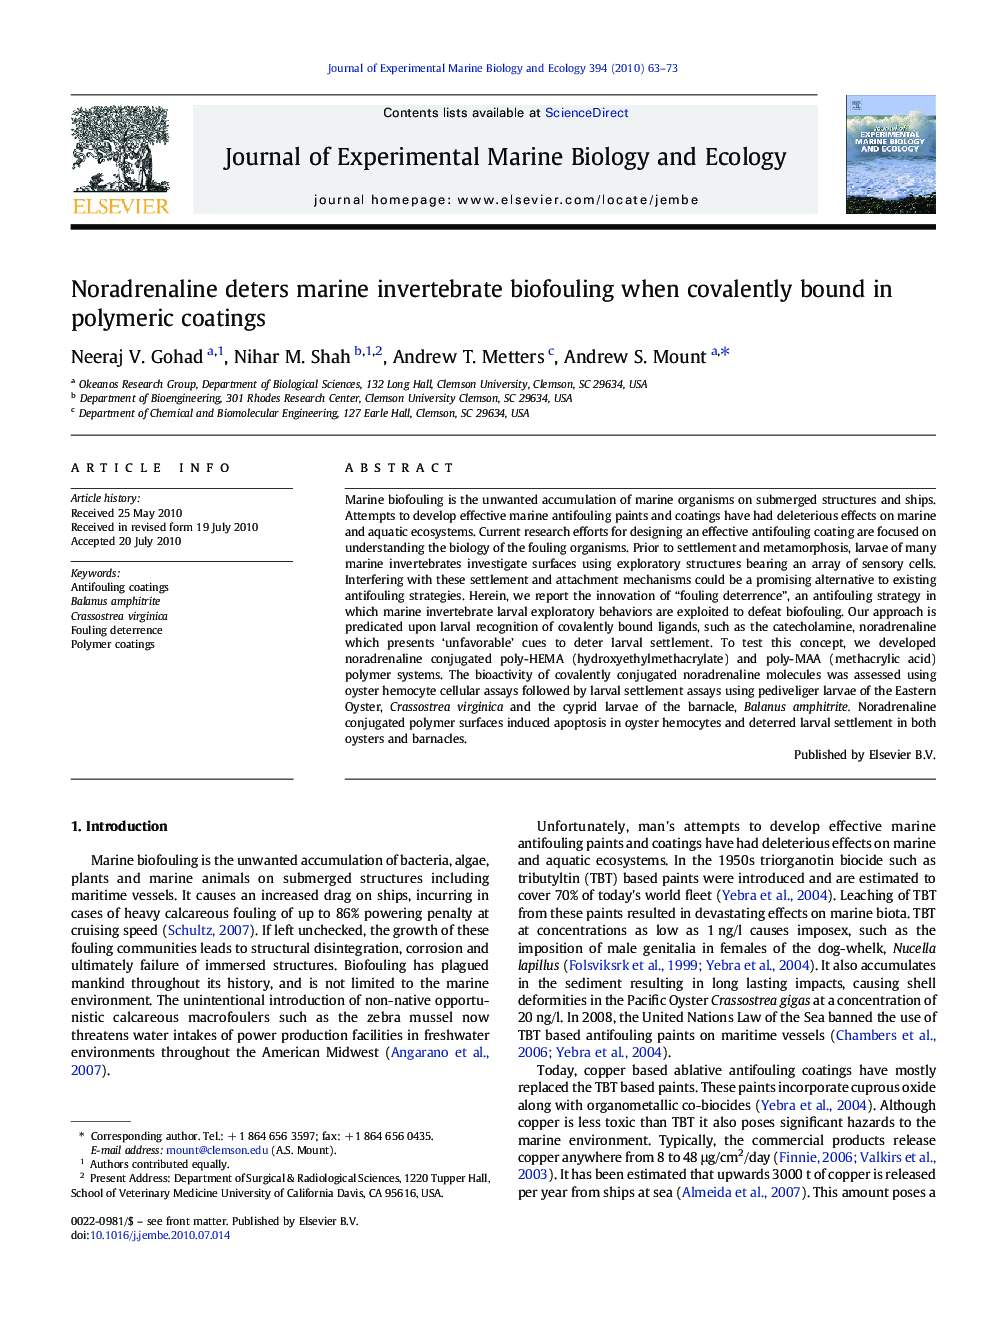 Noradrenaline deters marine invertebrate biofouling when covalently bound in polymeric coatings